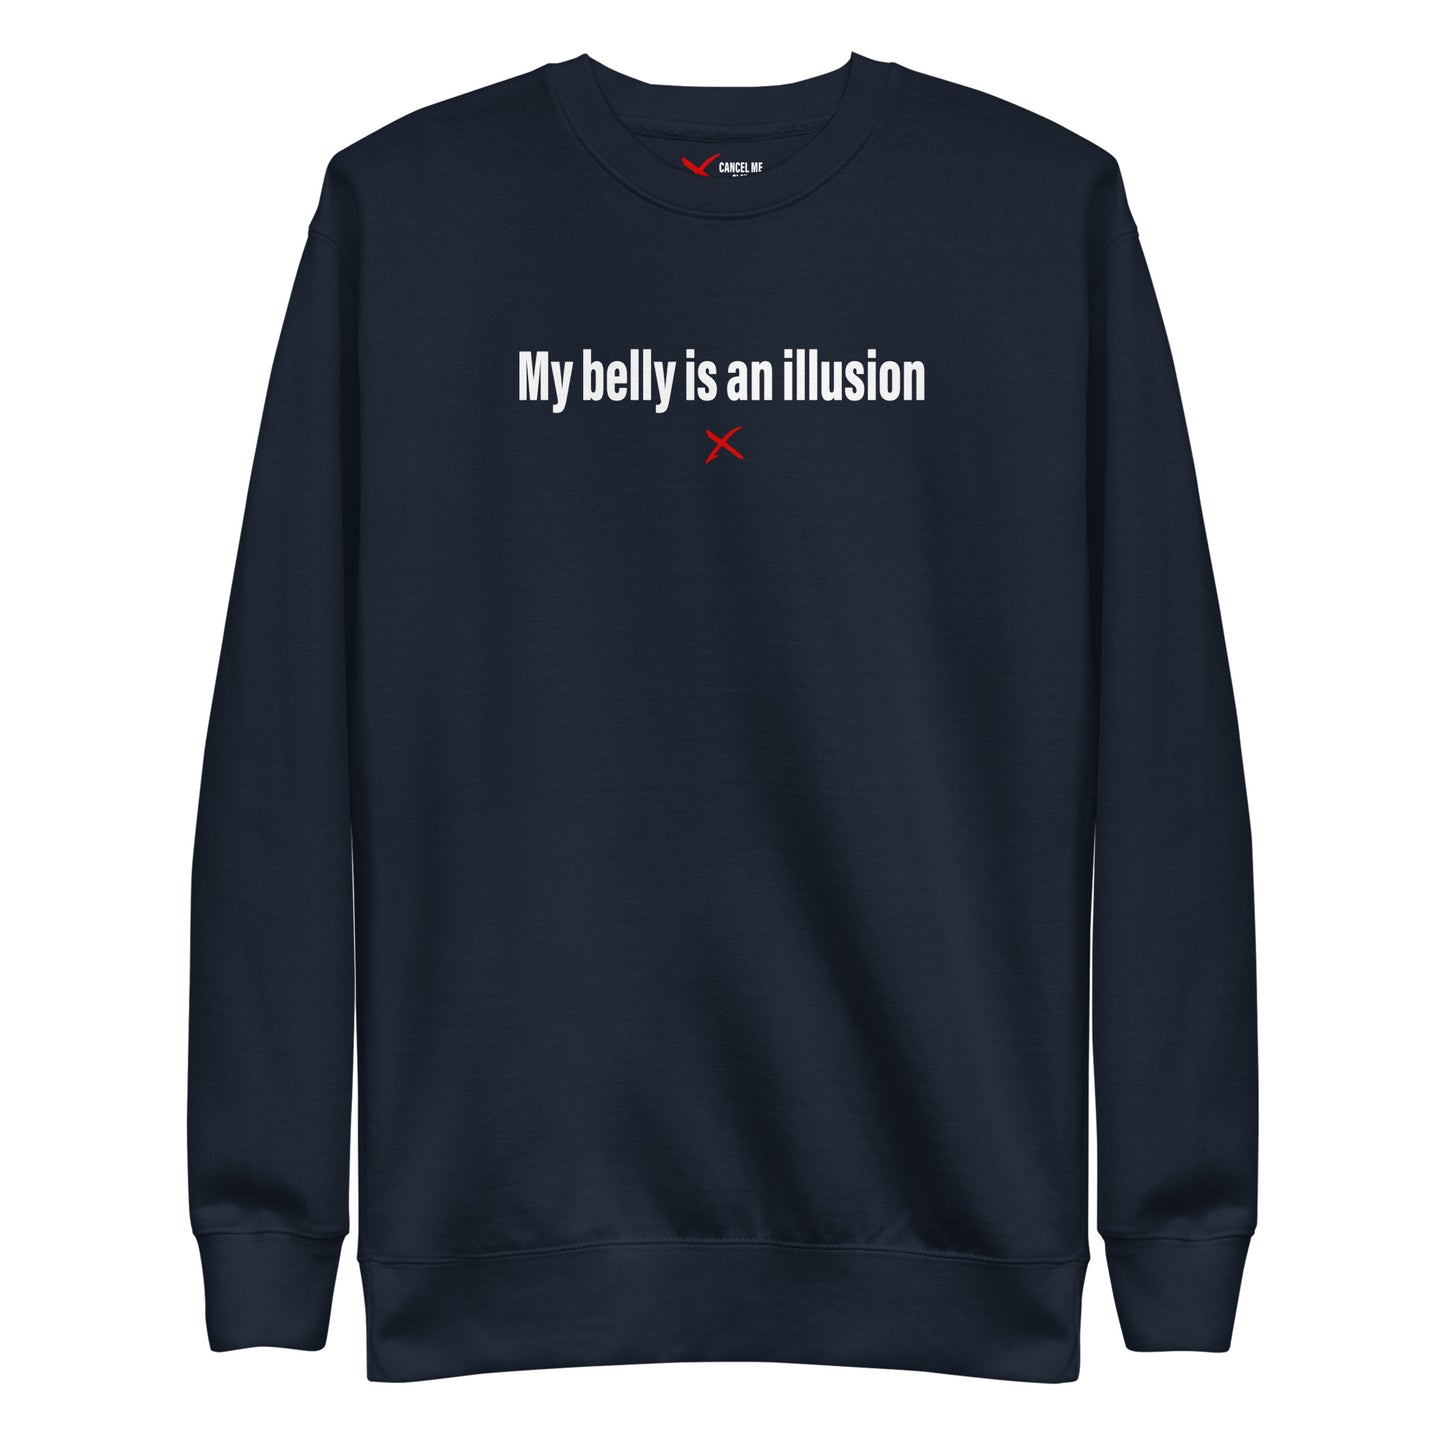 My belly is an illusion - Sweatshirt